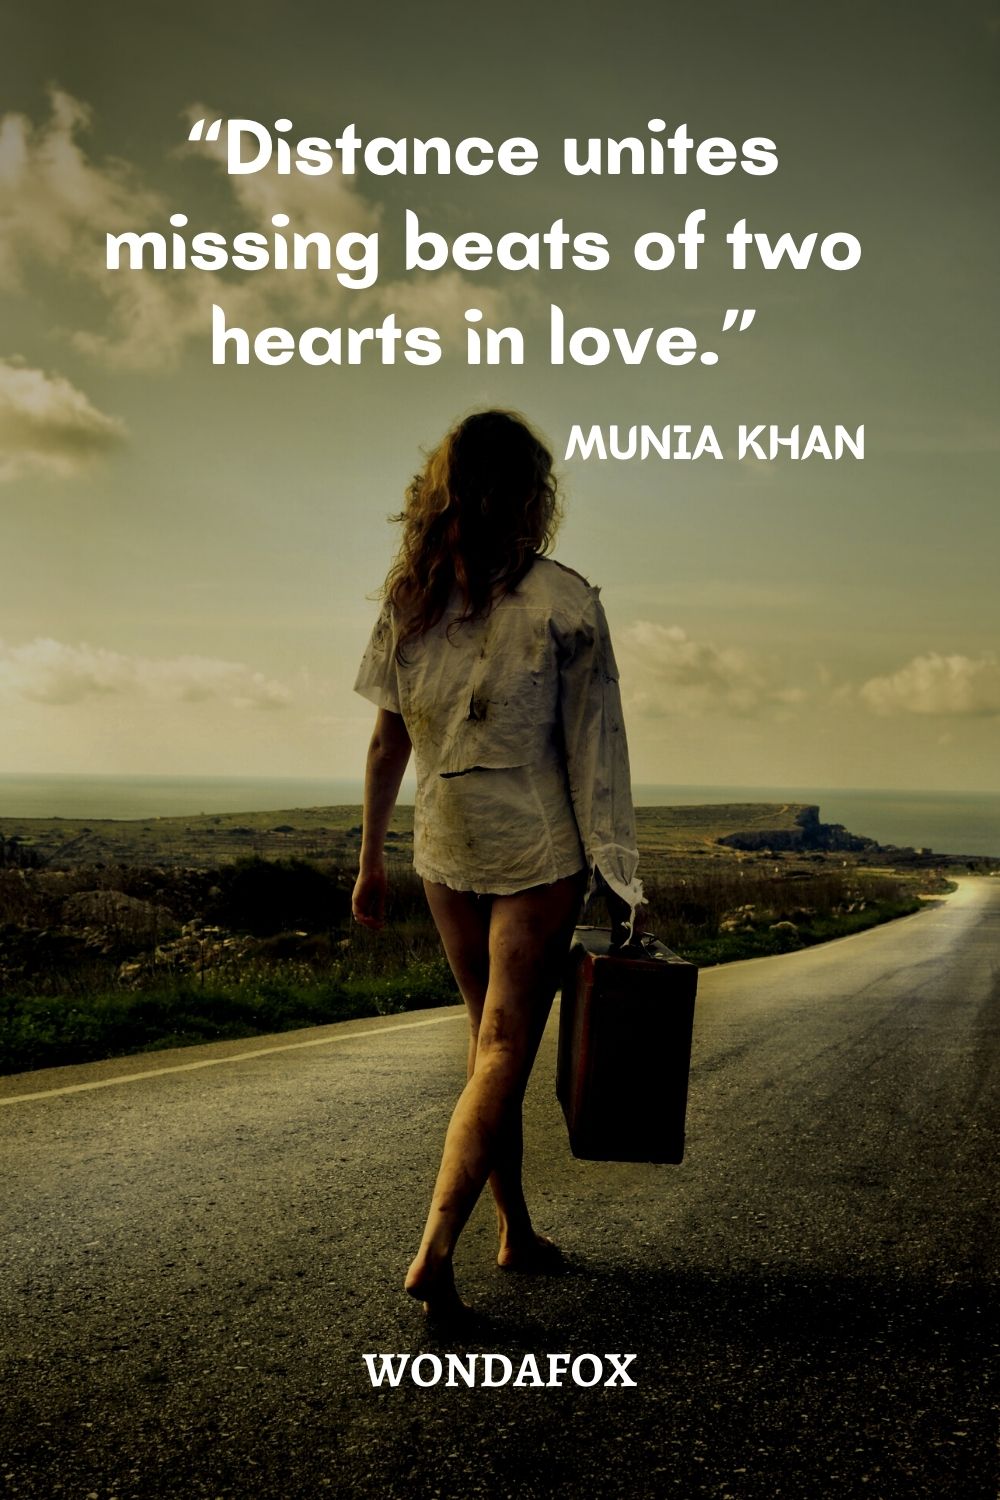 “Distance unites missing beats of two hearts in love.”
Munia Khan